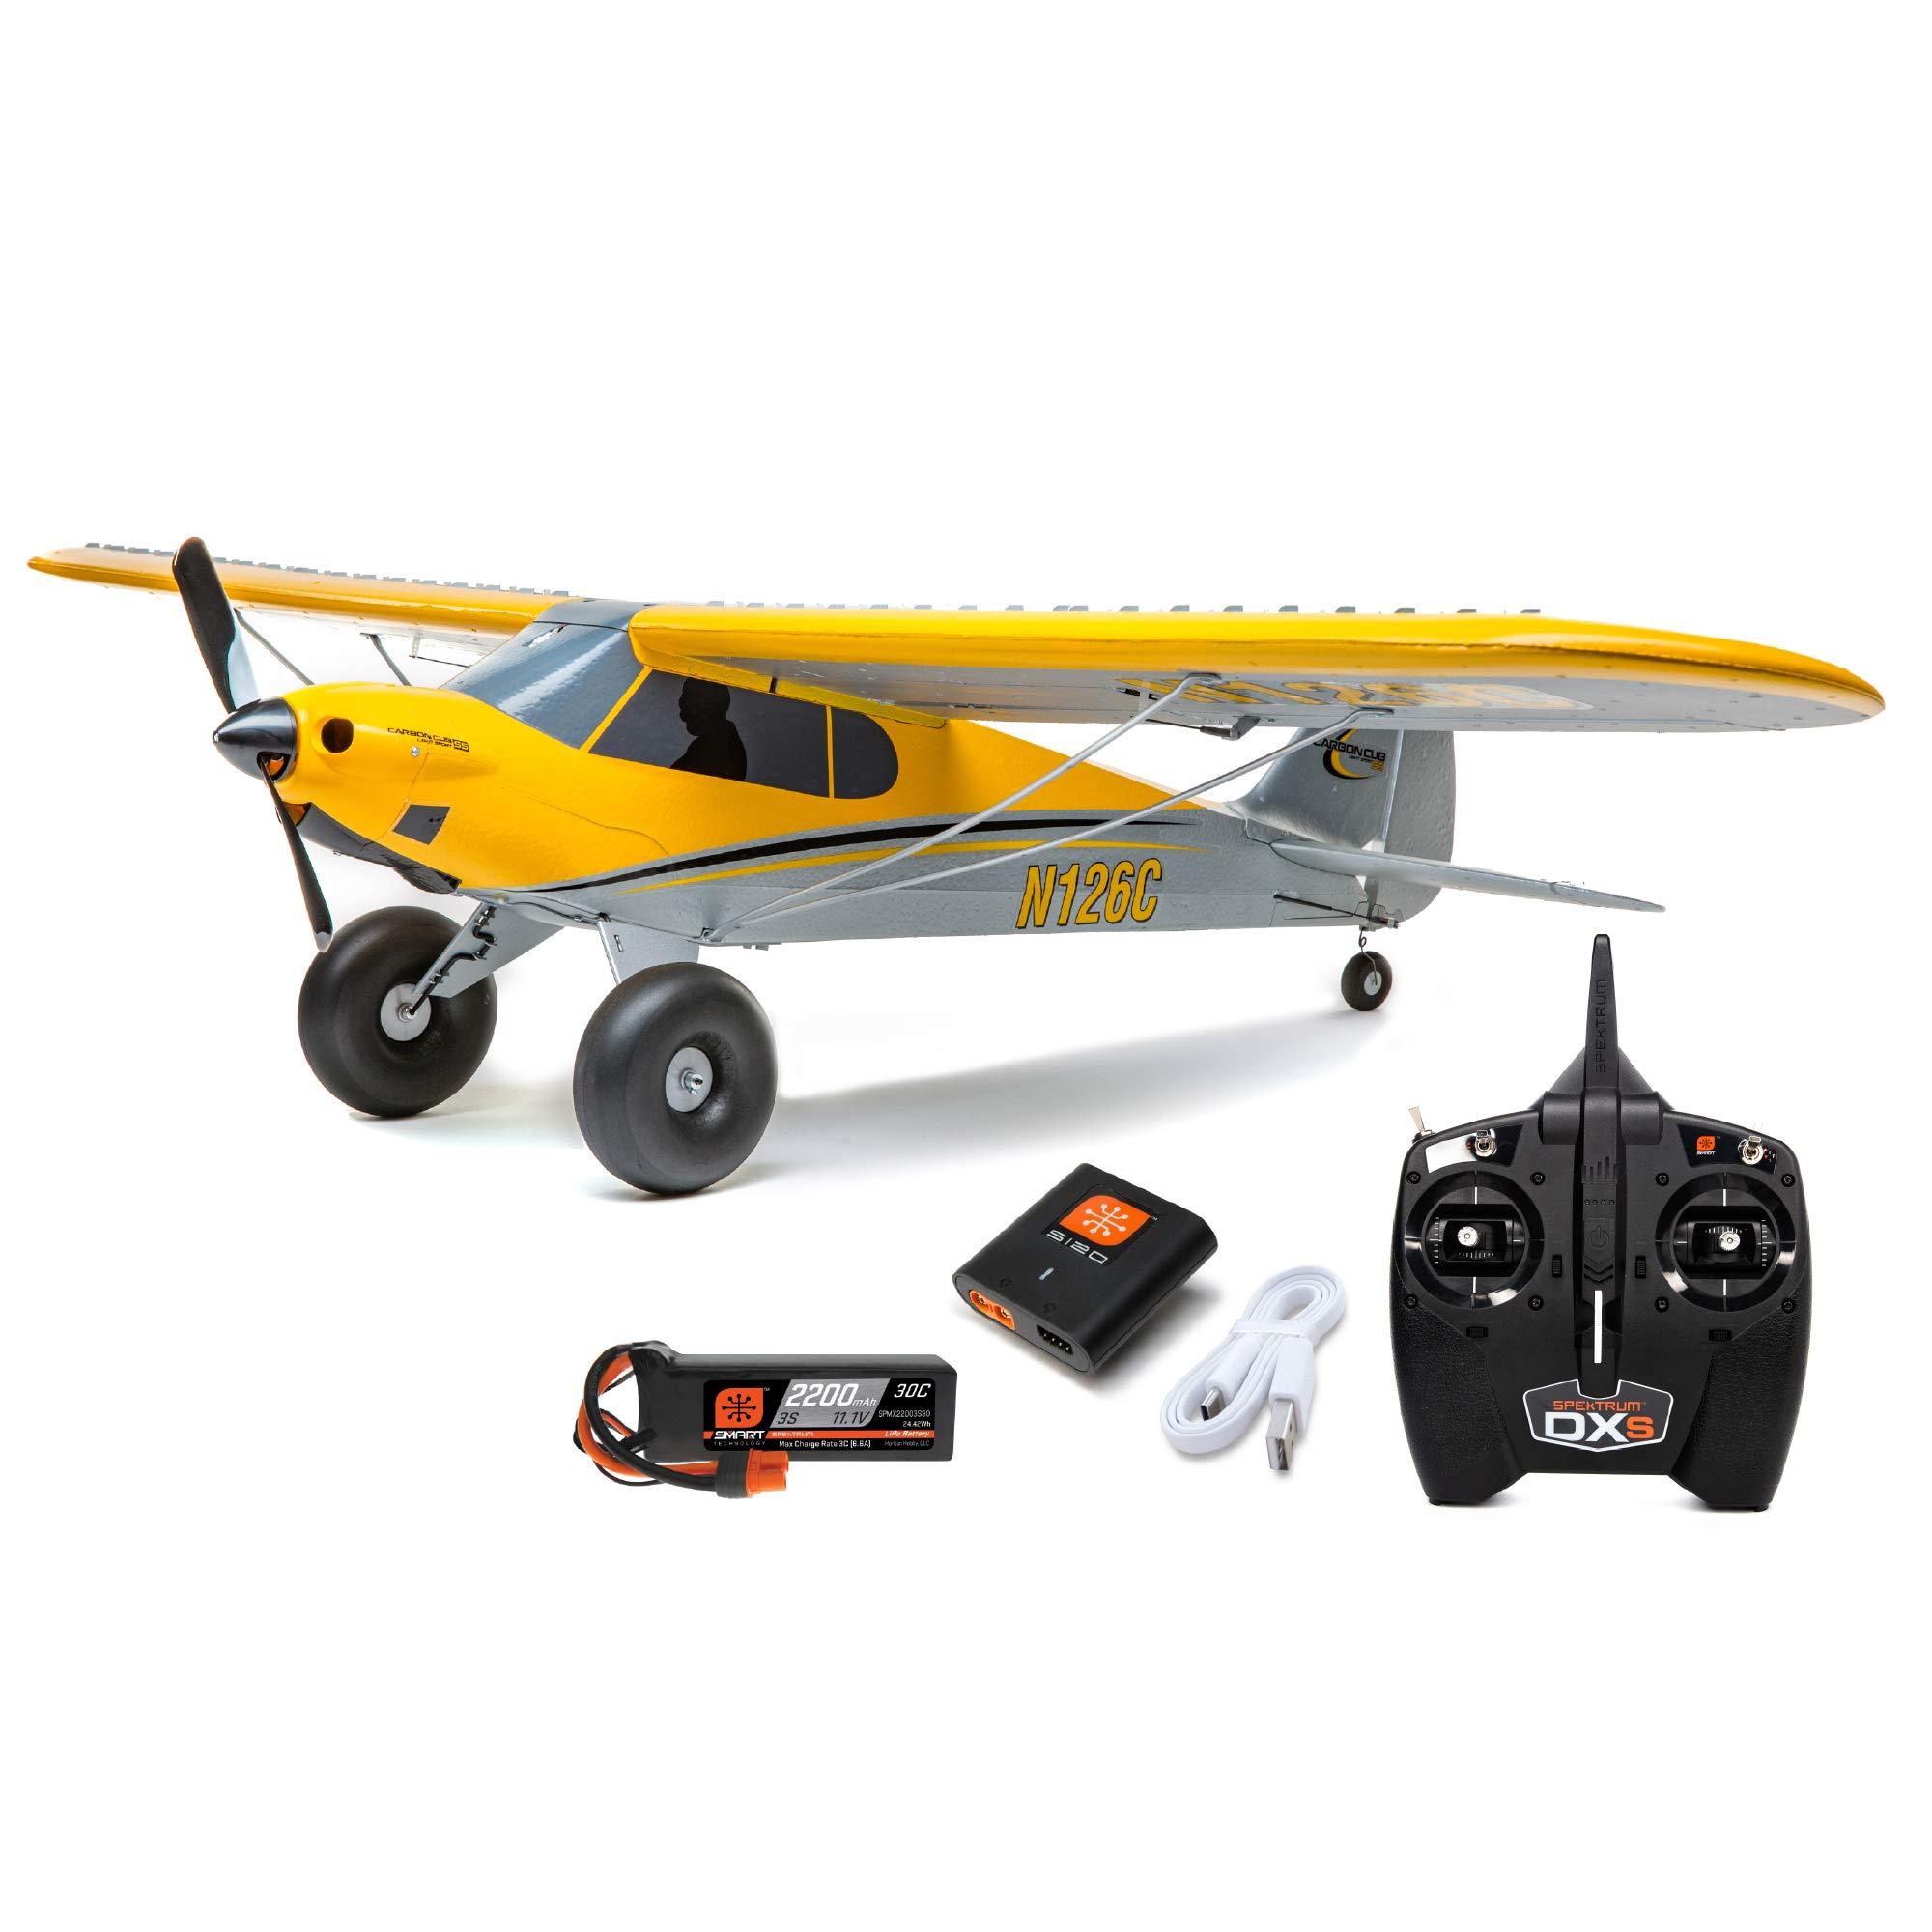 Remote Control Plane Under 500: A Budget-Friendly Option: Carbon Cub S+ RC Plane - Safe and Easy Flying with Built-in GPS and SAFE Plus Technology